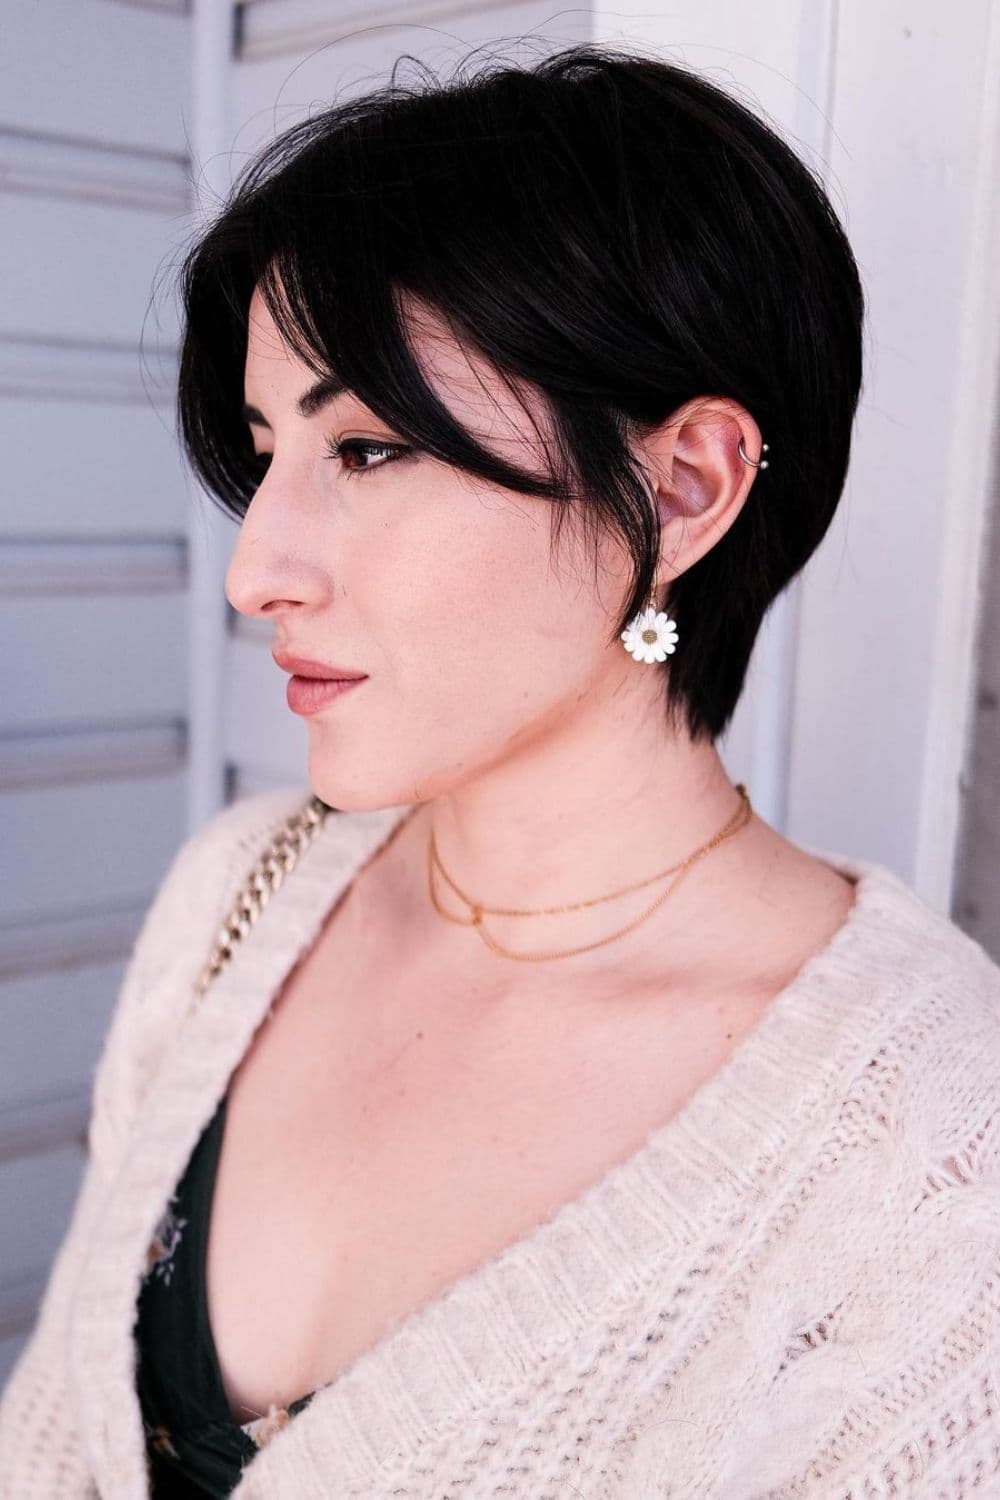 A woman with a black feathered pixie cut.